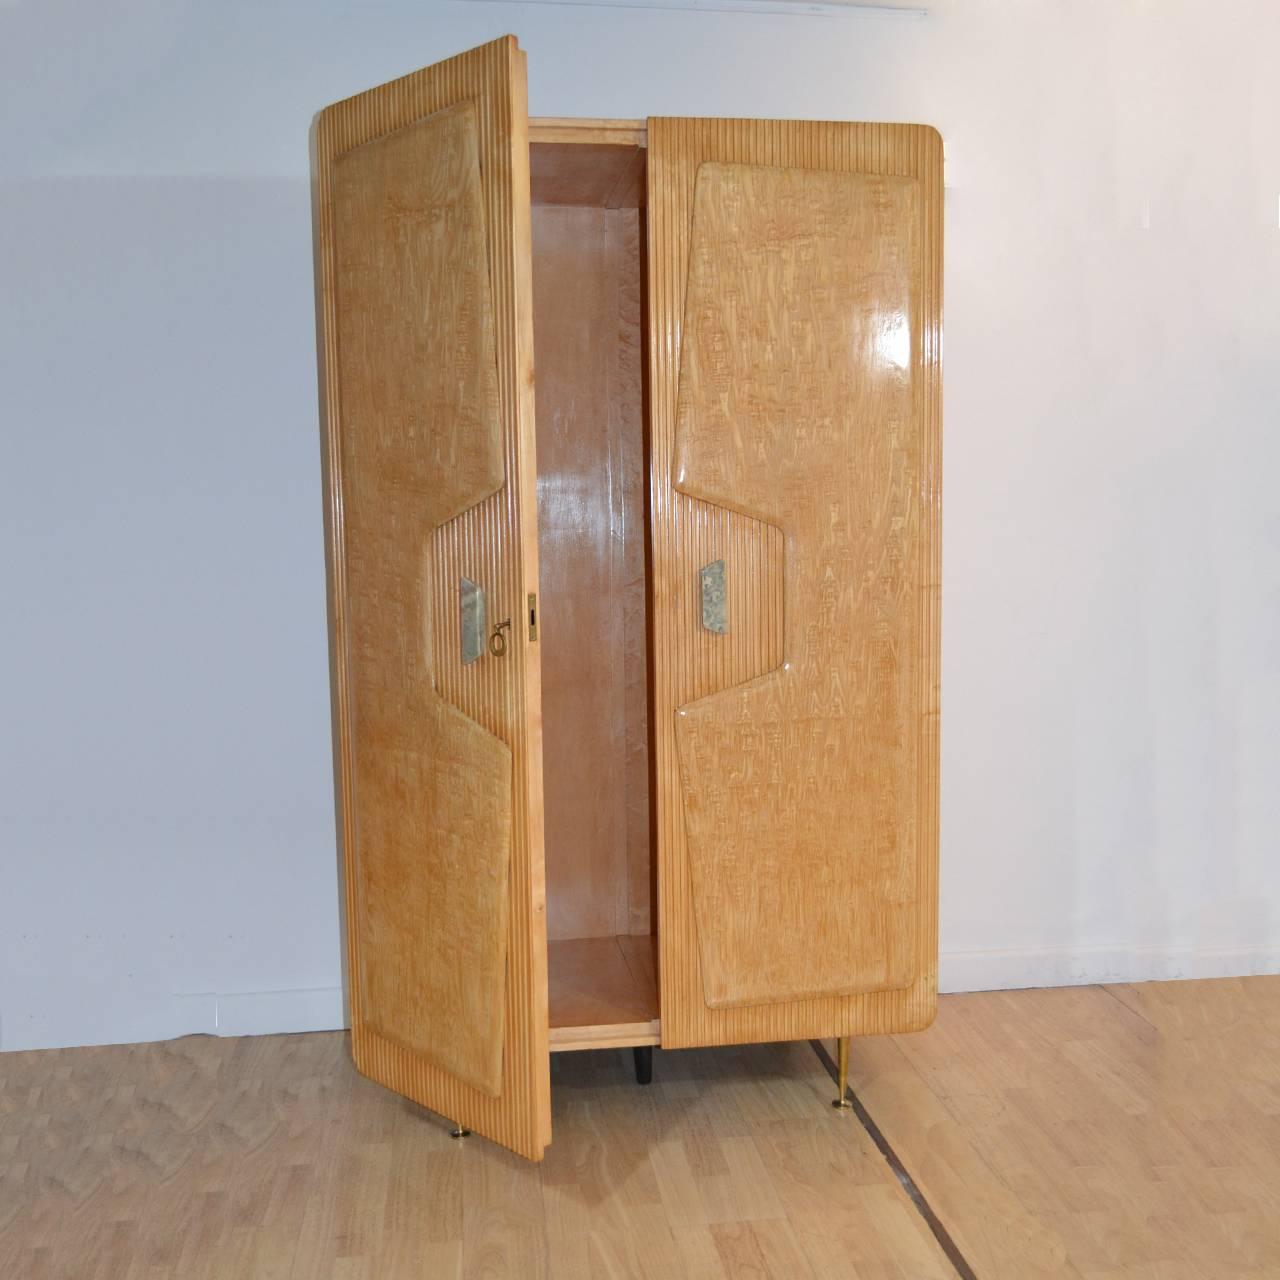 High quality two doors wardrobe from Cantu', Italy 1950s.
Birch wood, brass legs, marble handles and original key.
Fully repolished, fantastic condition.